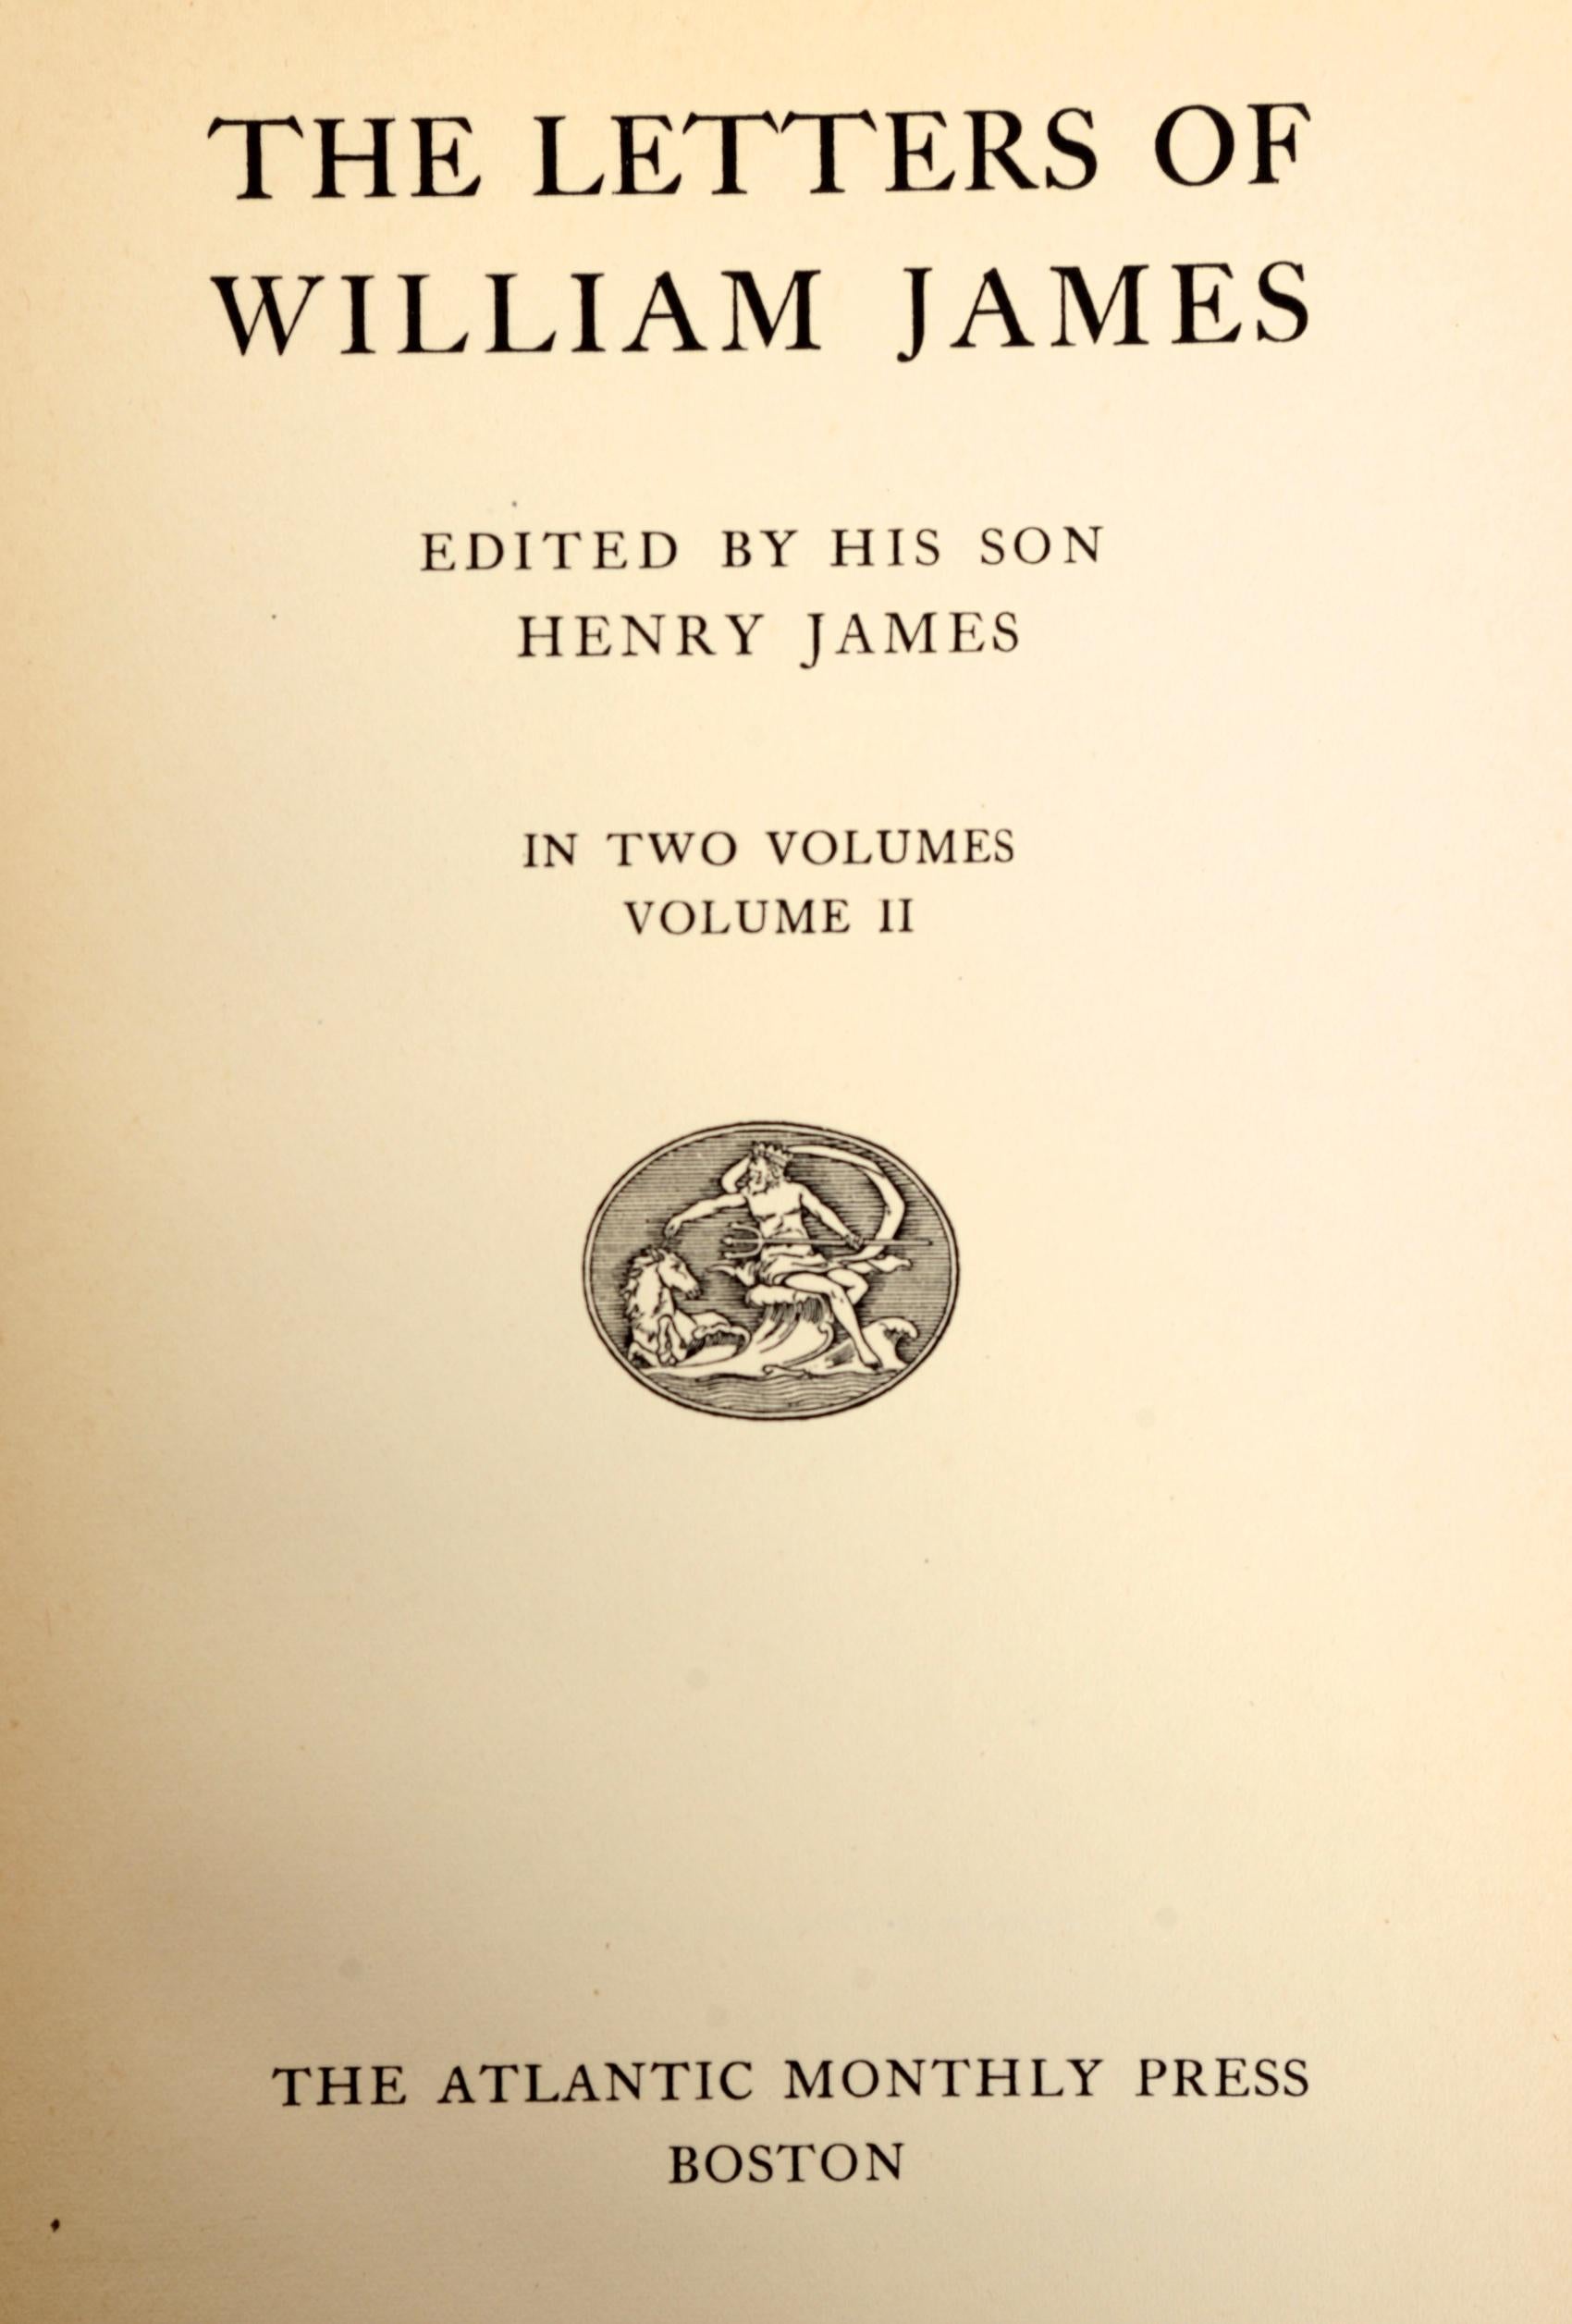 The Letters of William James, 2 Volumes Edited by His Son Henry James circa 1920 3